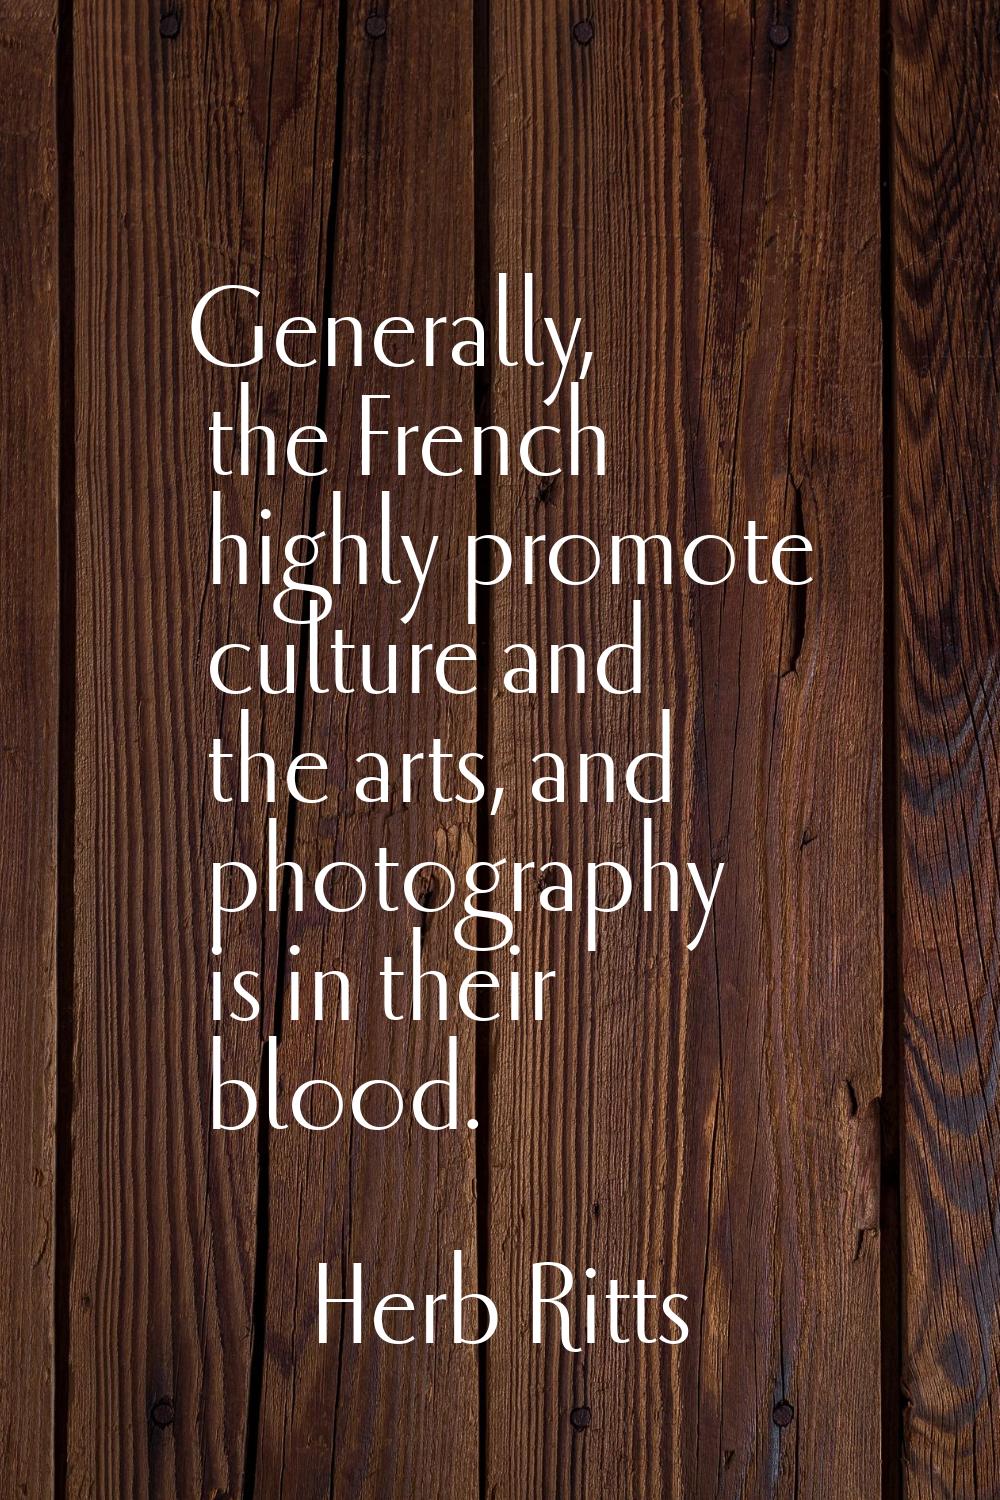 Generally, the French highly promote culture and the arts, and photography is in their blood.